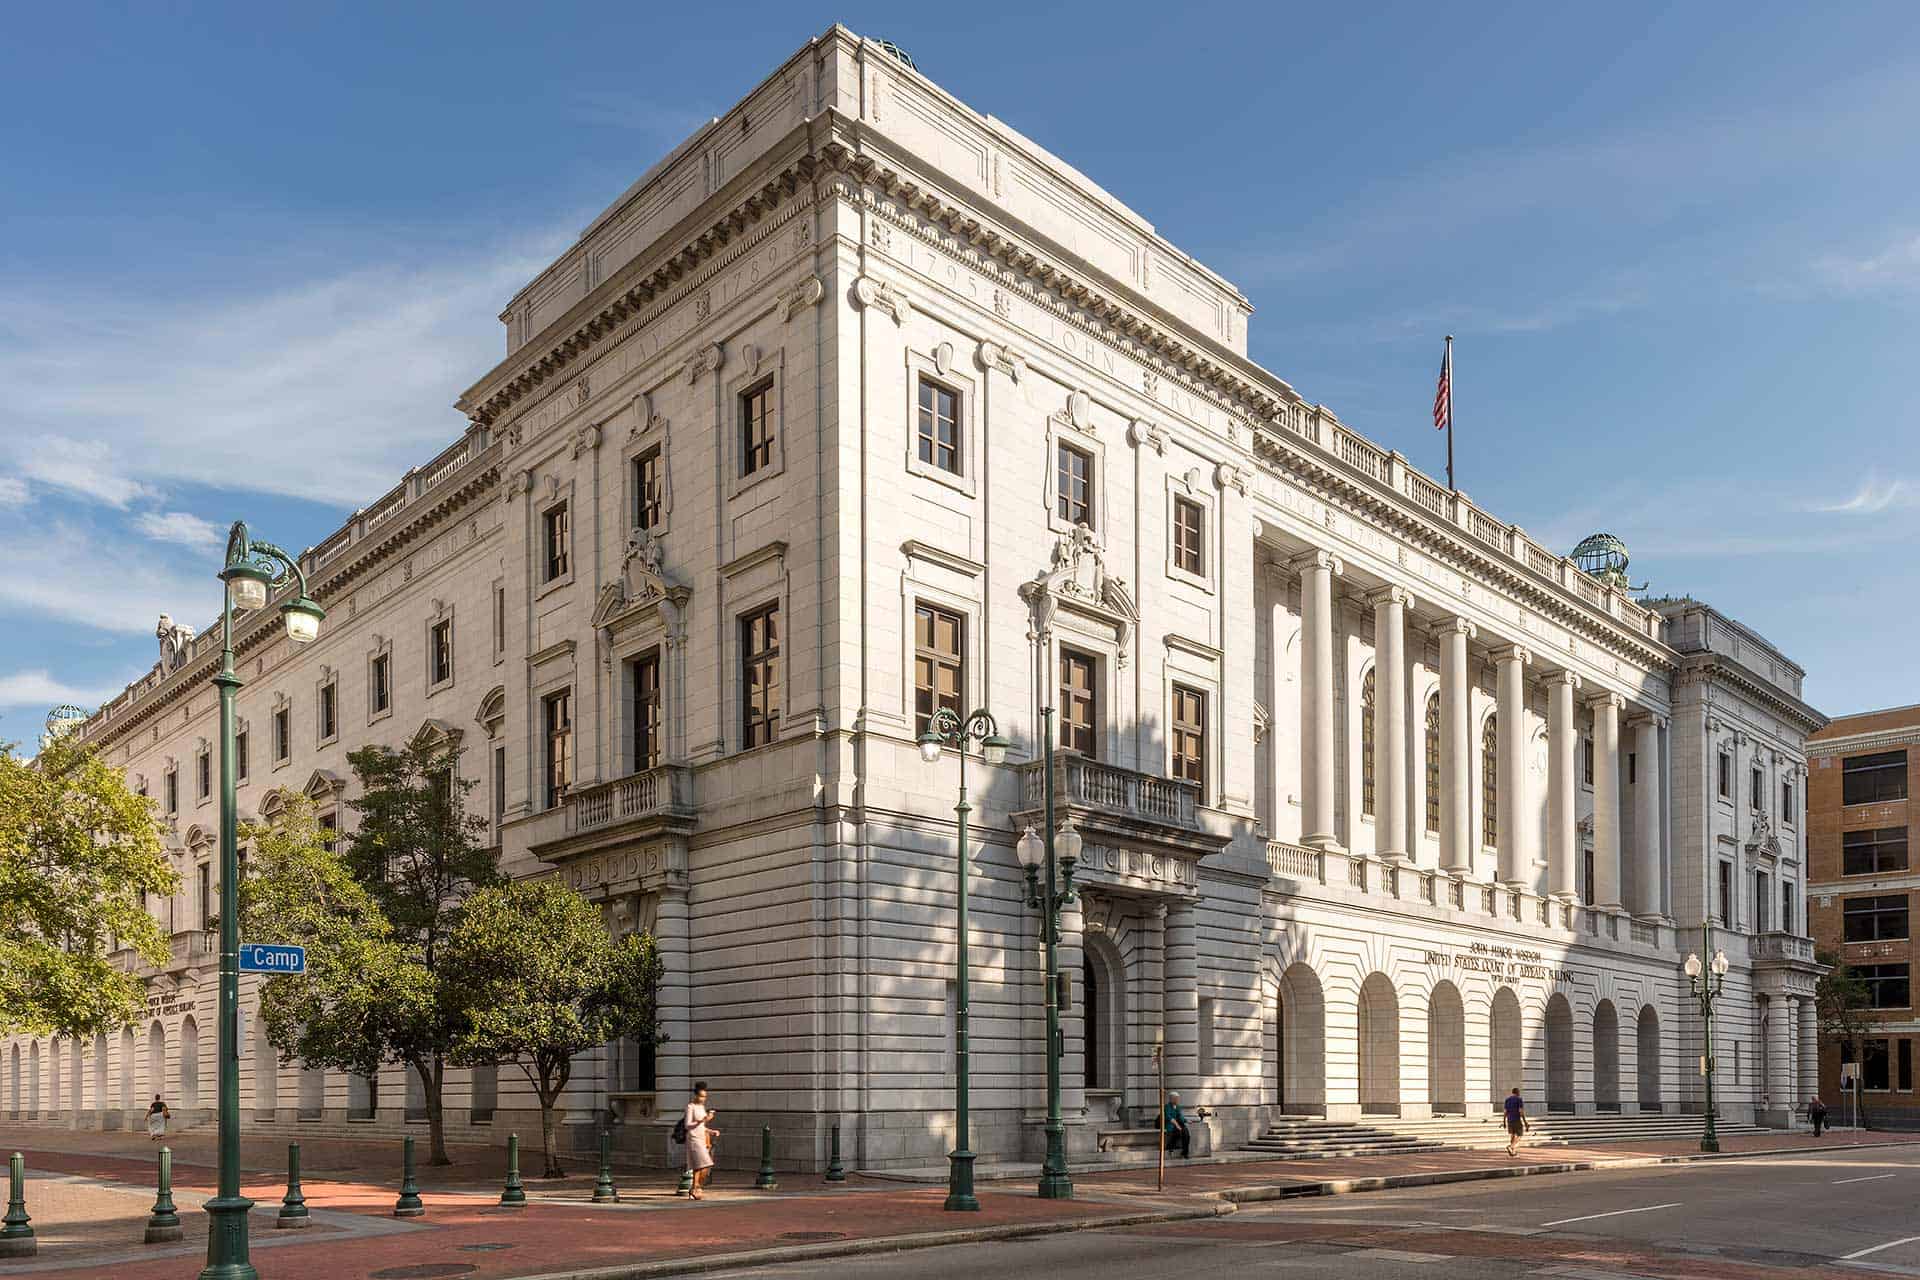 The white brick building that houses the 5th Circuit court of appeals, which ruled on the Affordable Care Act, shown from the corner.